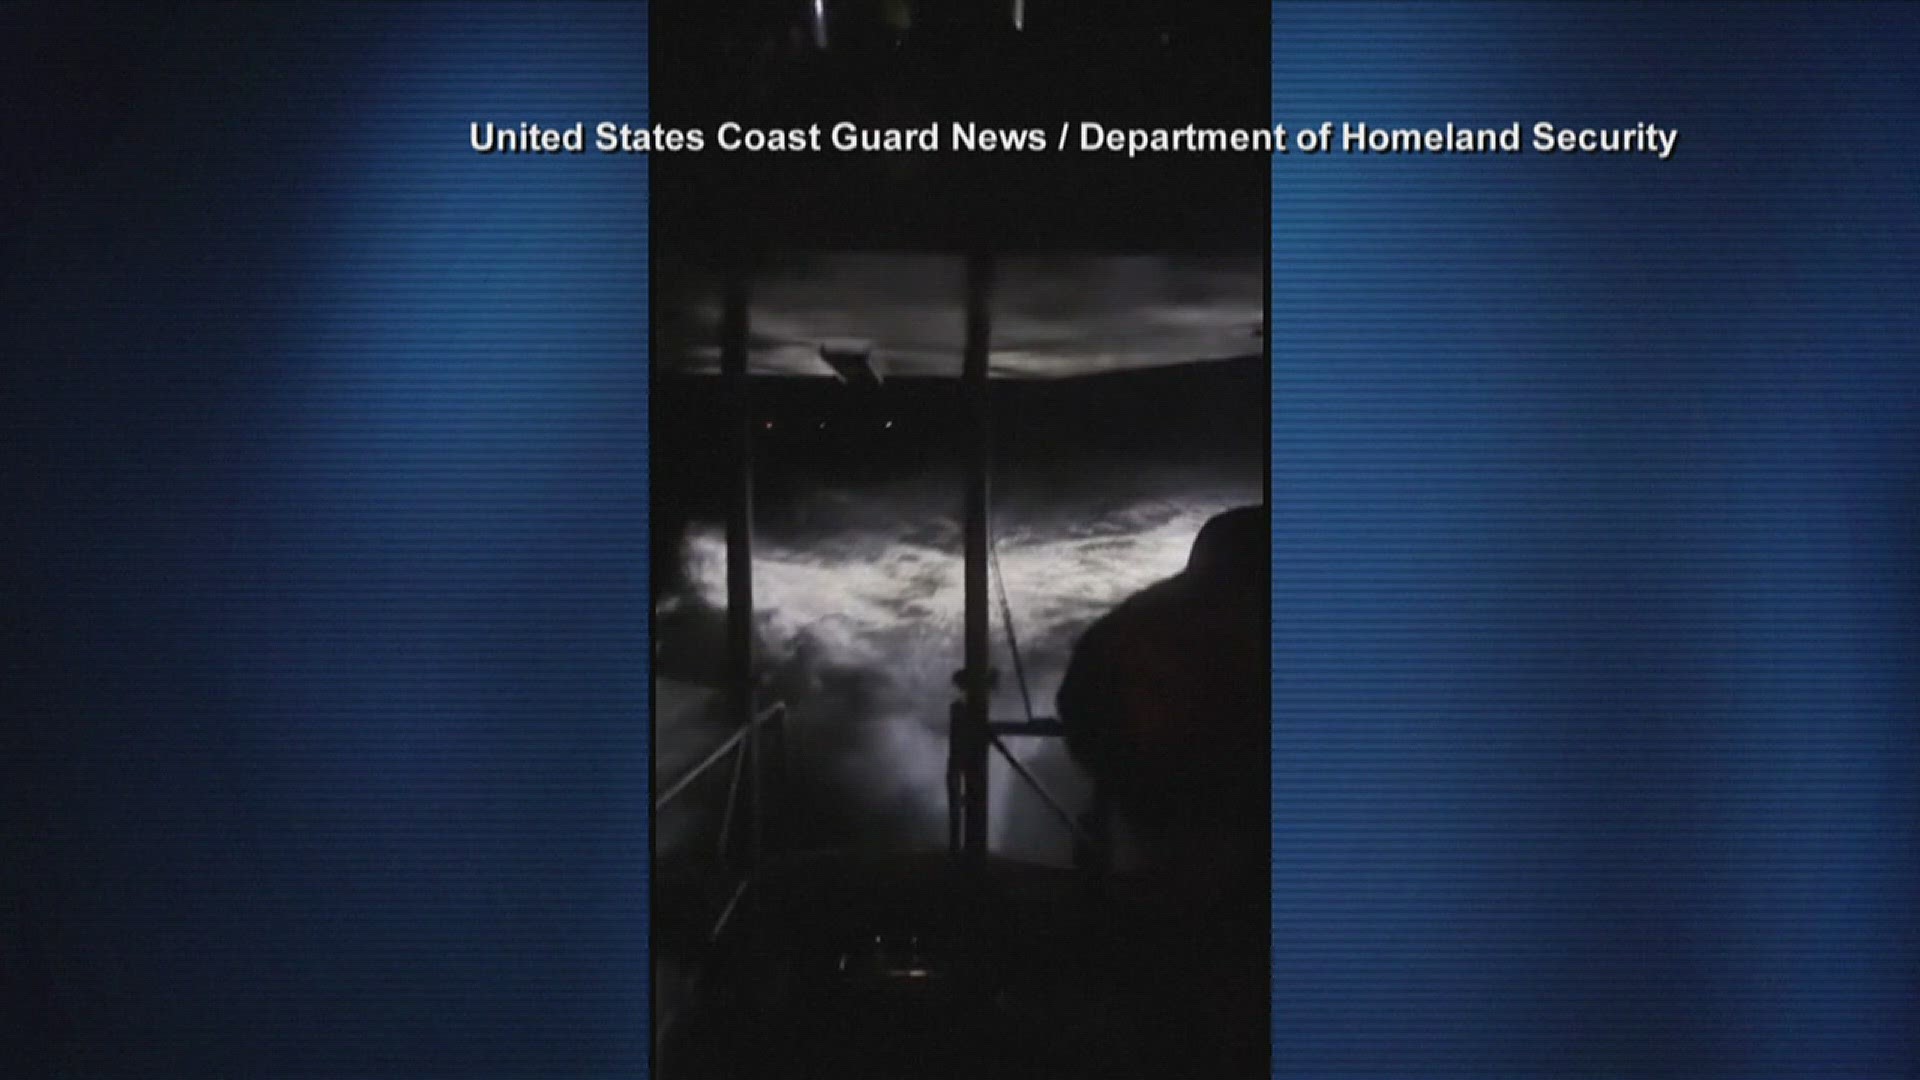 The owner of sailing vessel managed to use a cell phone to make contact with the North Carolina sector of the Coast Guard.